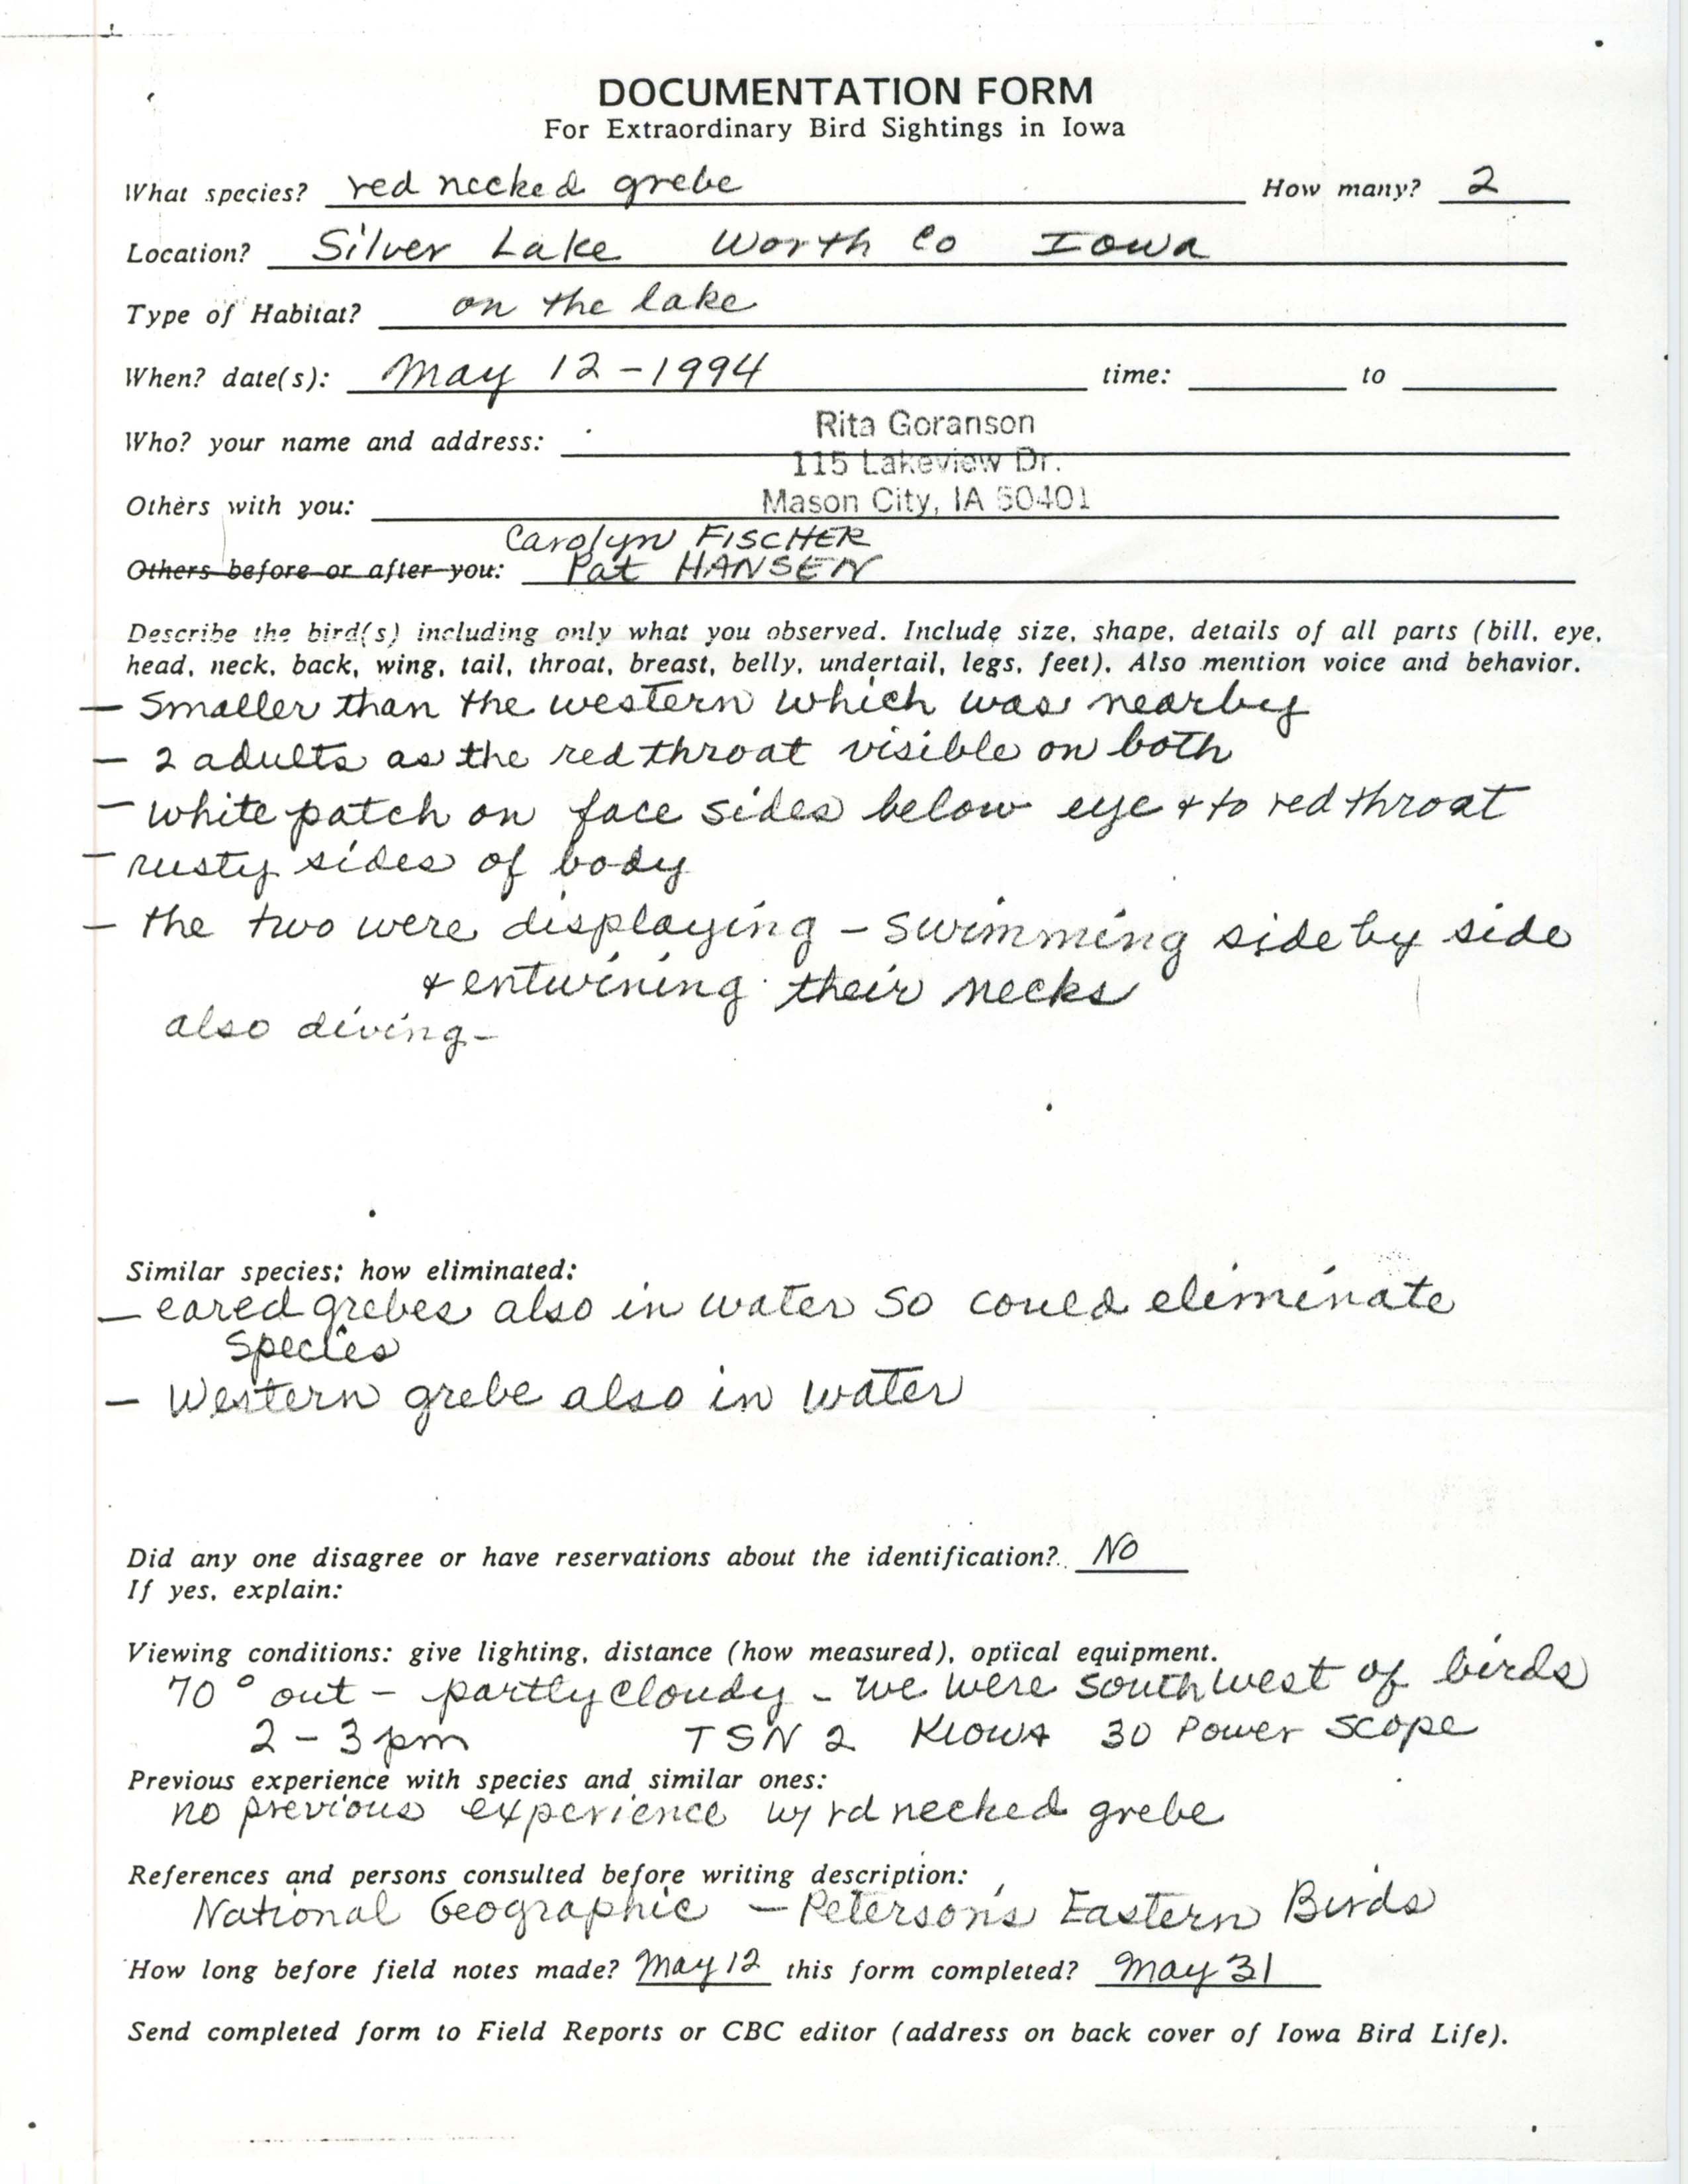 Rare bird documentation form for Red-necked Grebe at Silver Lake, 1994